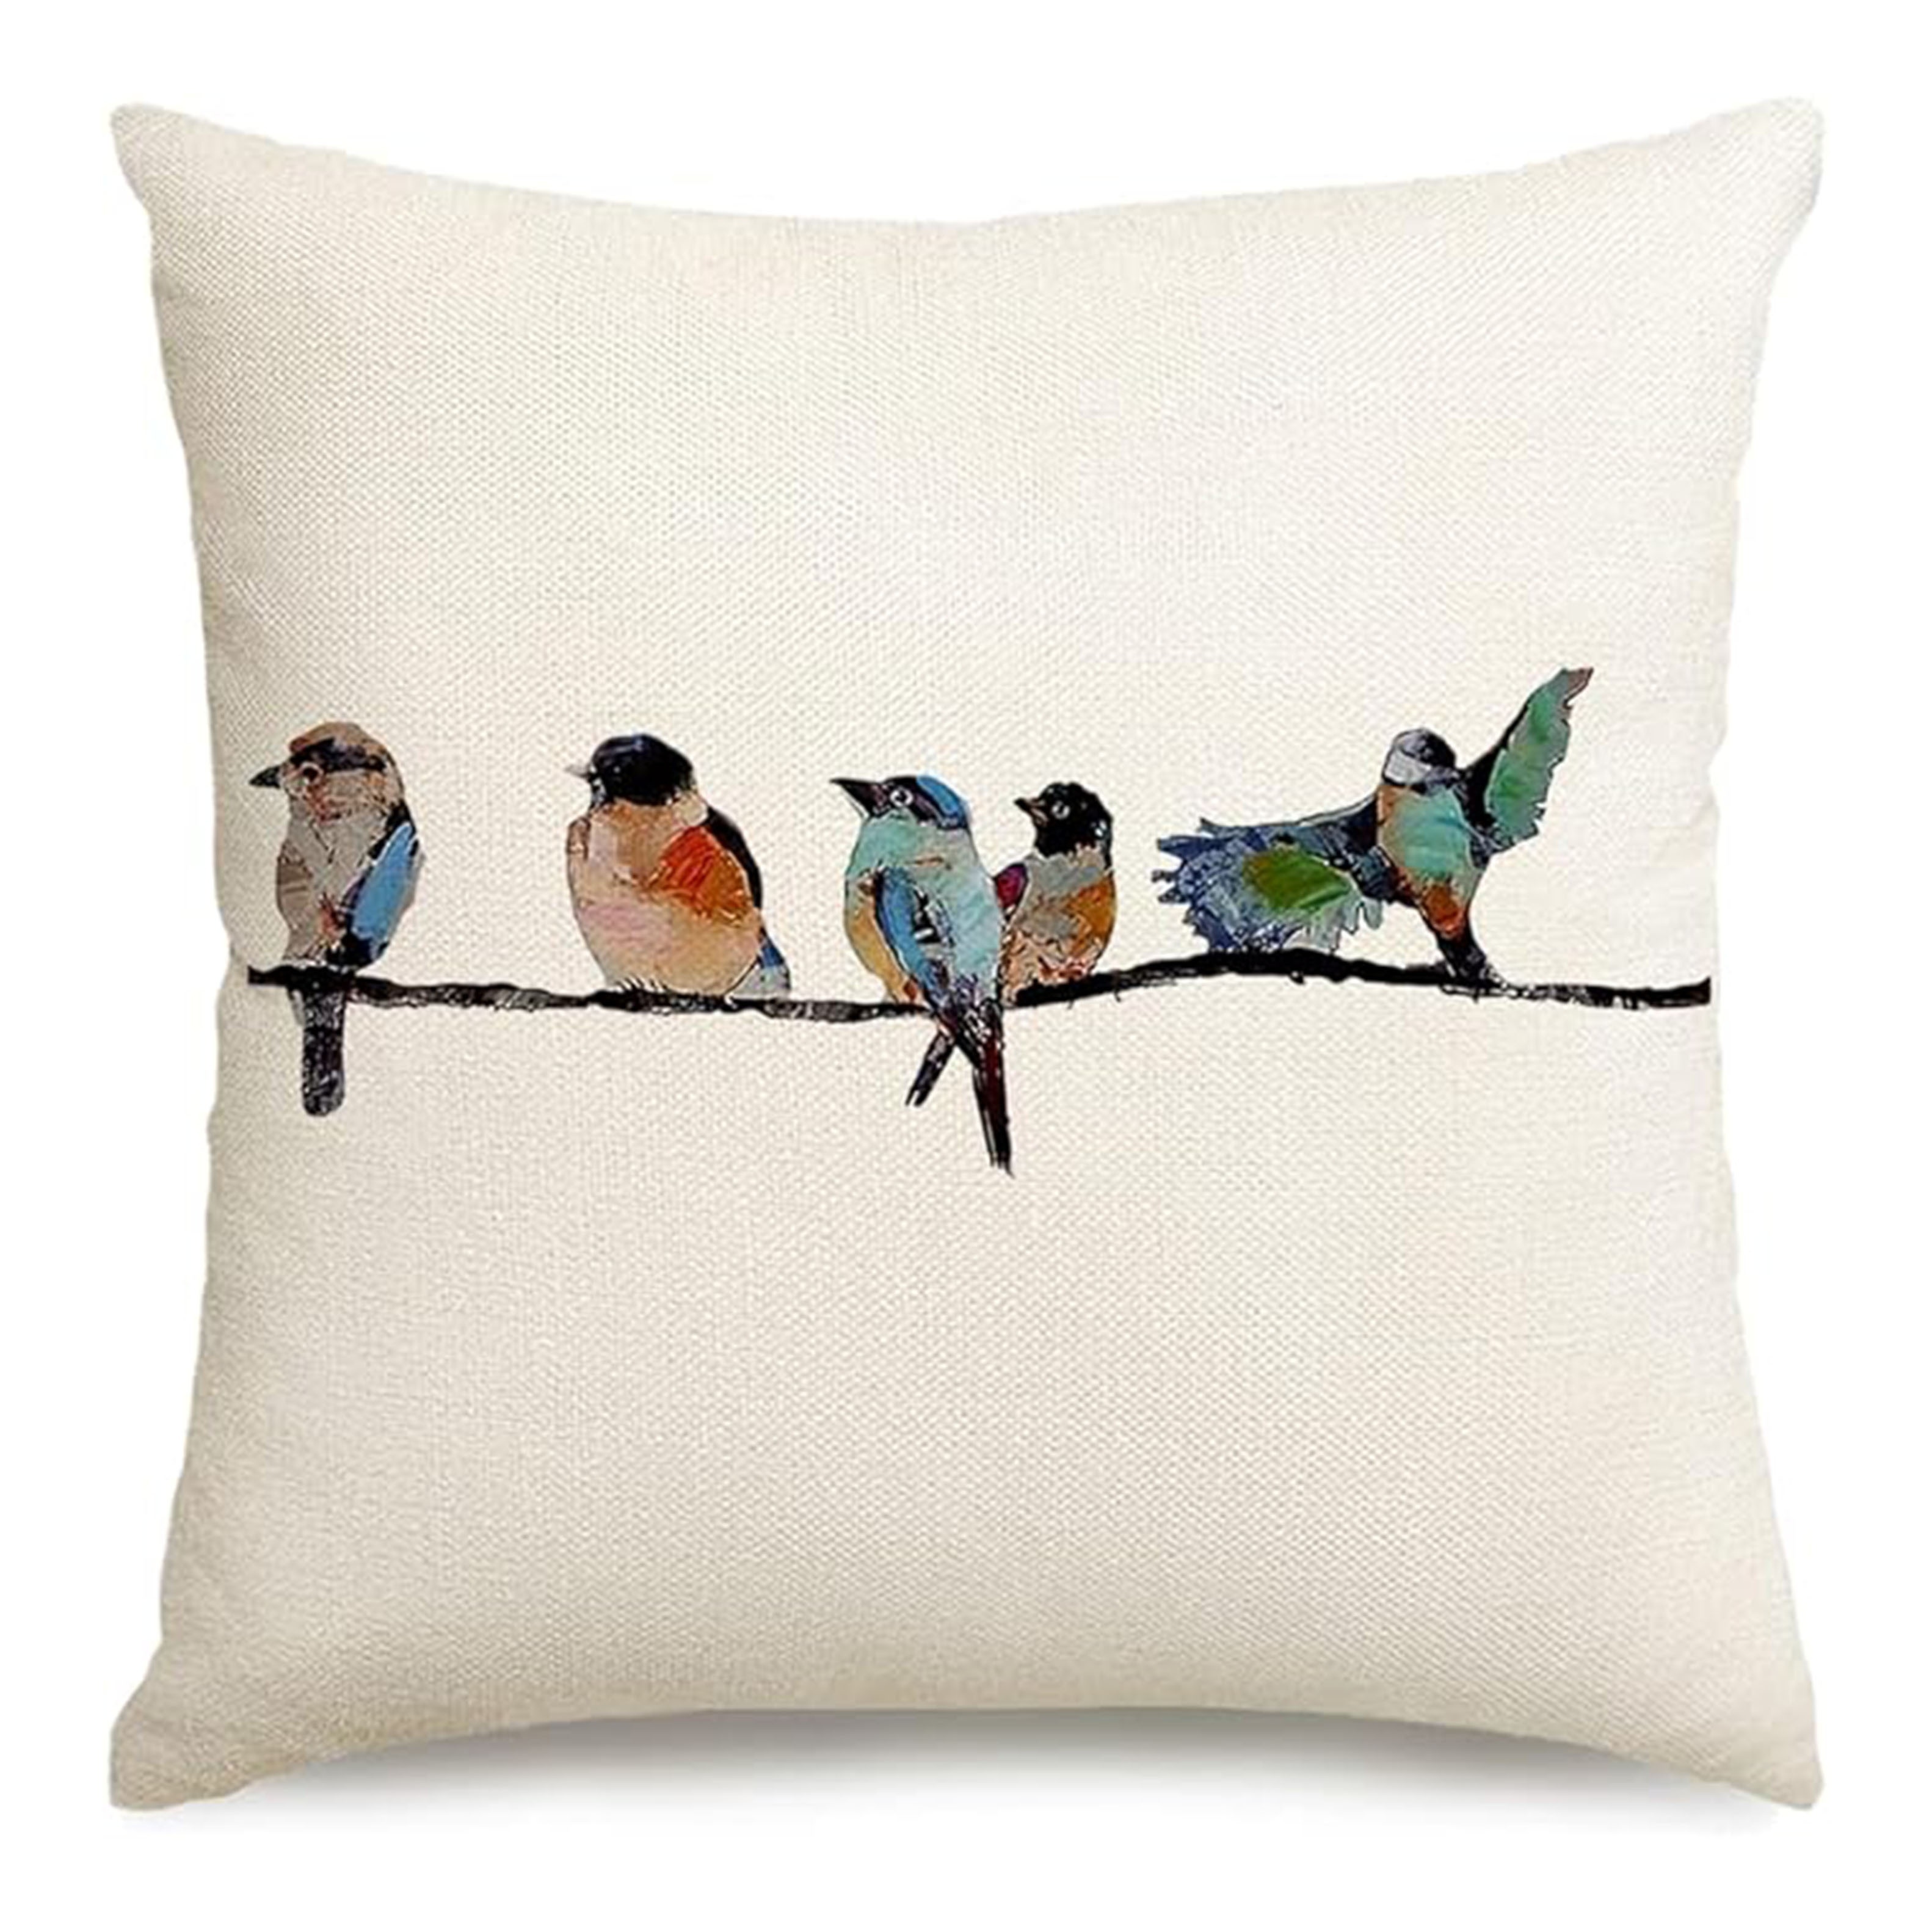 

Elegant Teal Blue Bird Throw Pillow Cover - Soft Cotton Linen, Zippered, Machine Washable For Sofa & Outdoor Decor